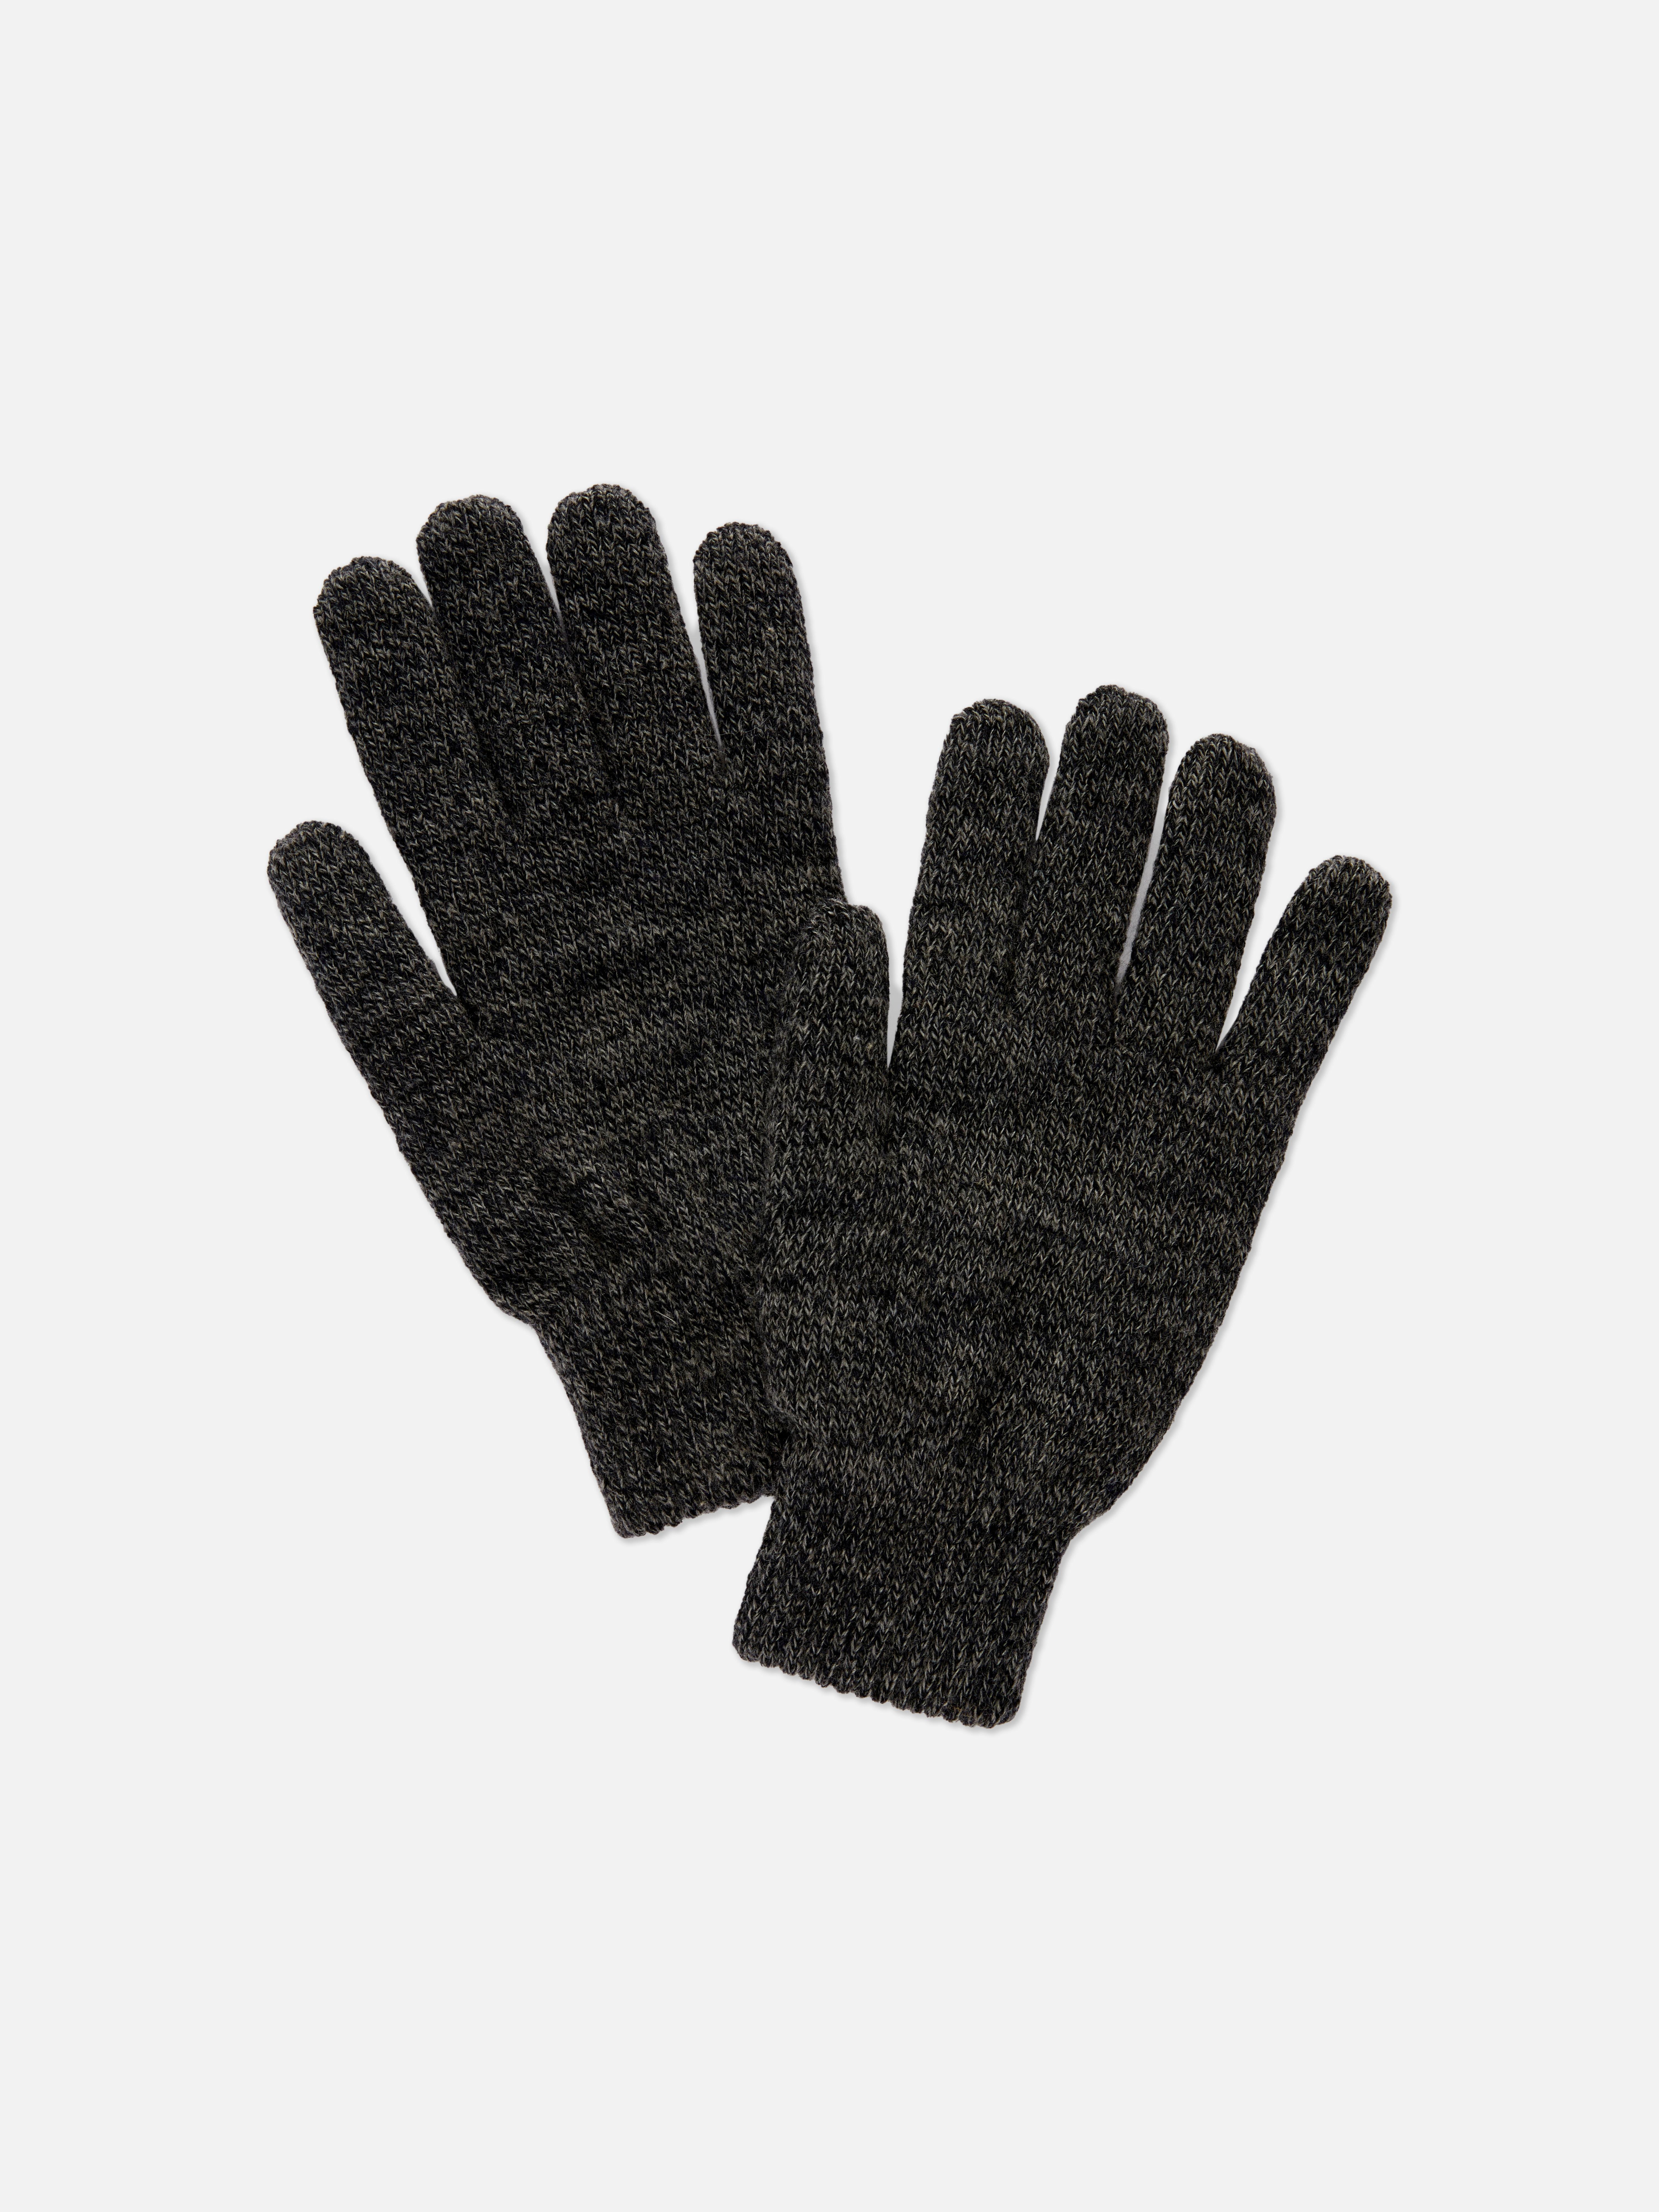 3M Thinsulate Gloves